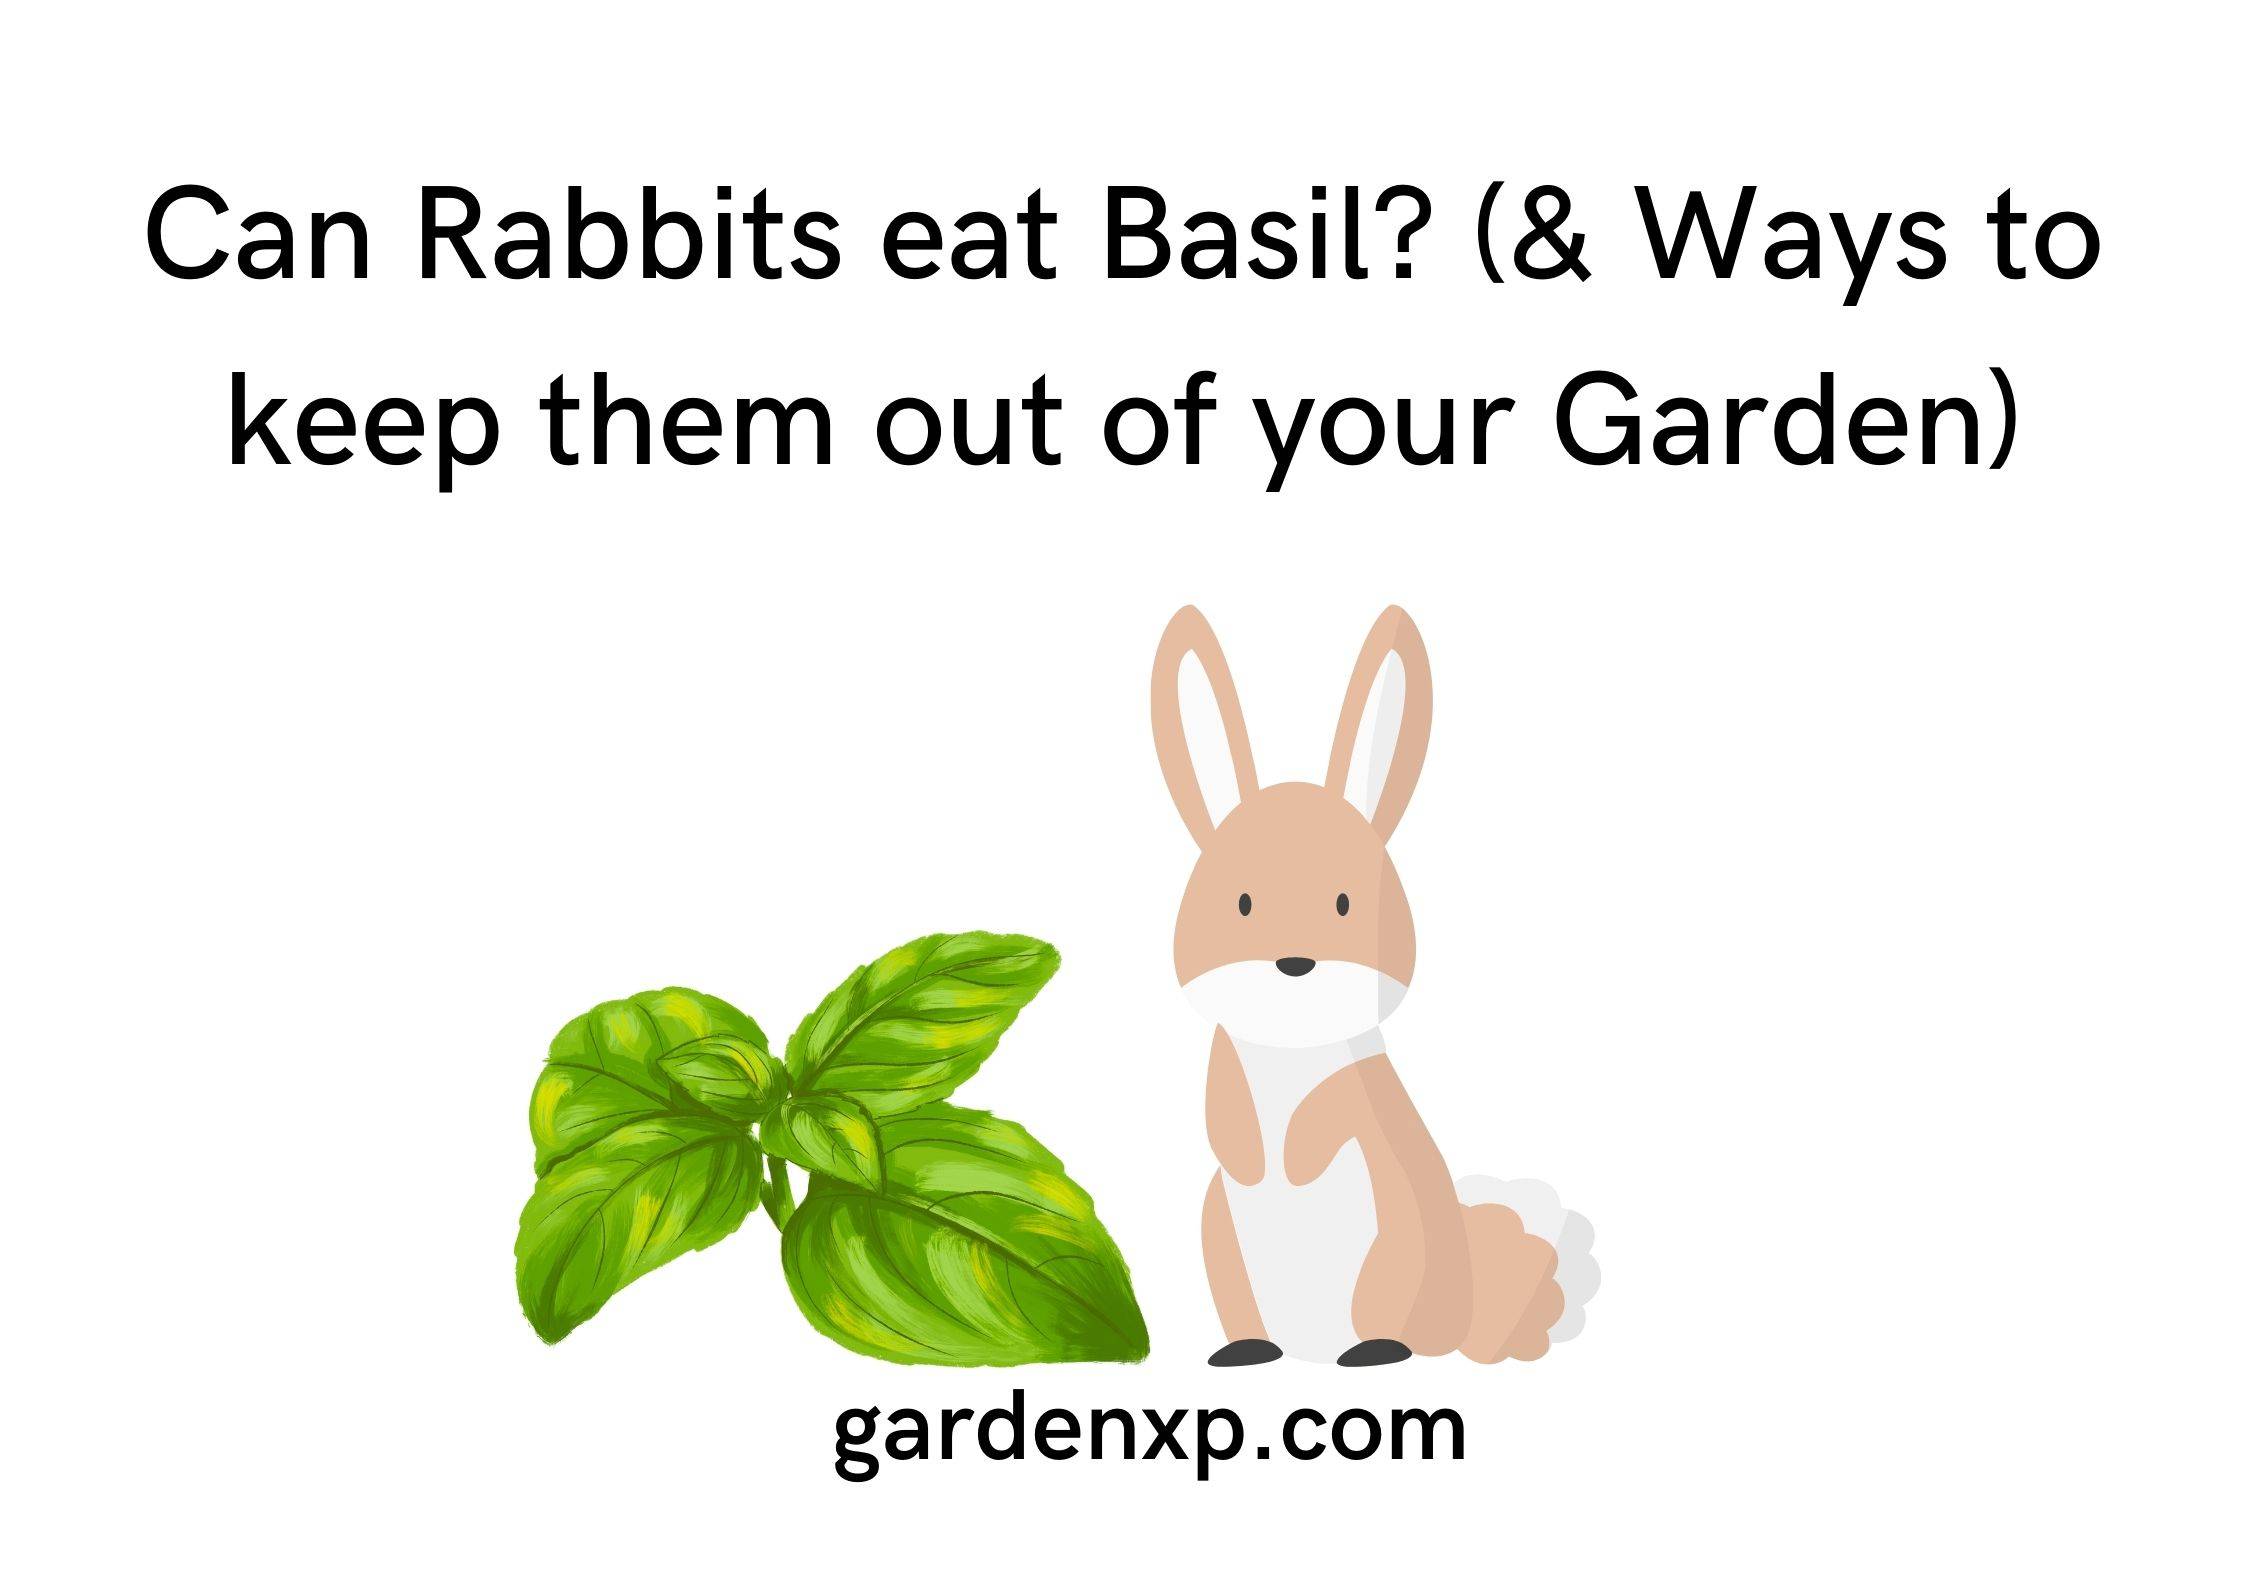 Can Rabbits eat Basil? (& Ways to keep them out of your Garden)